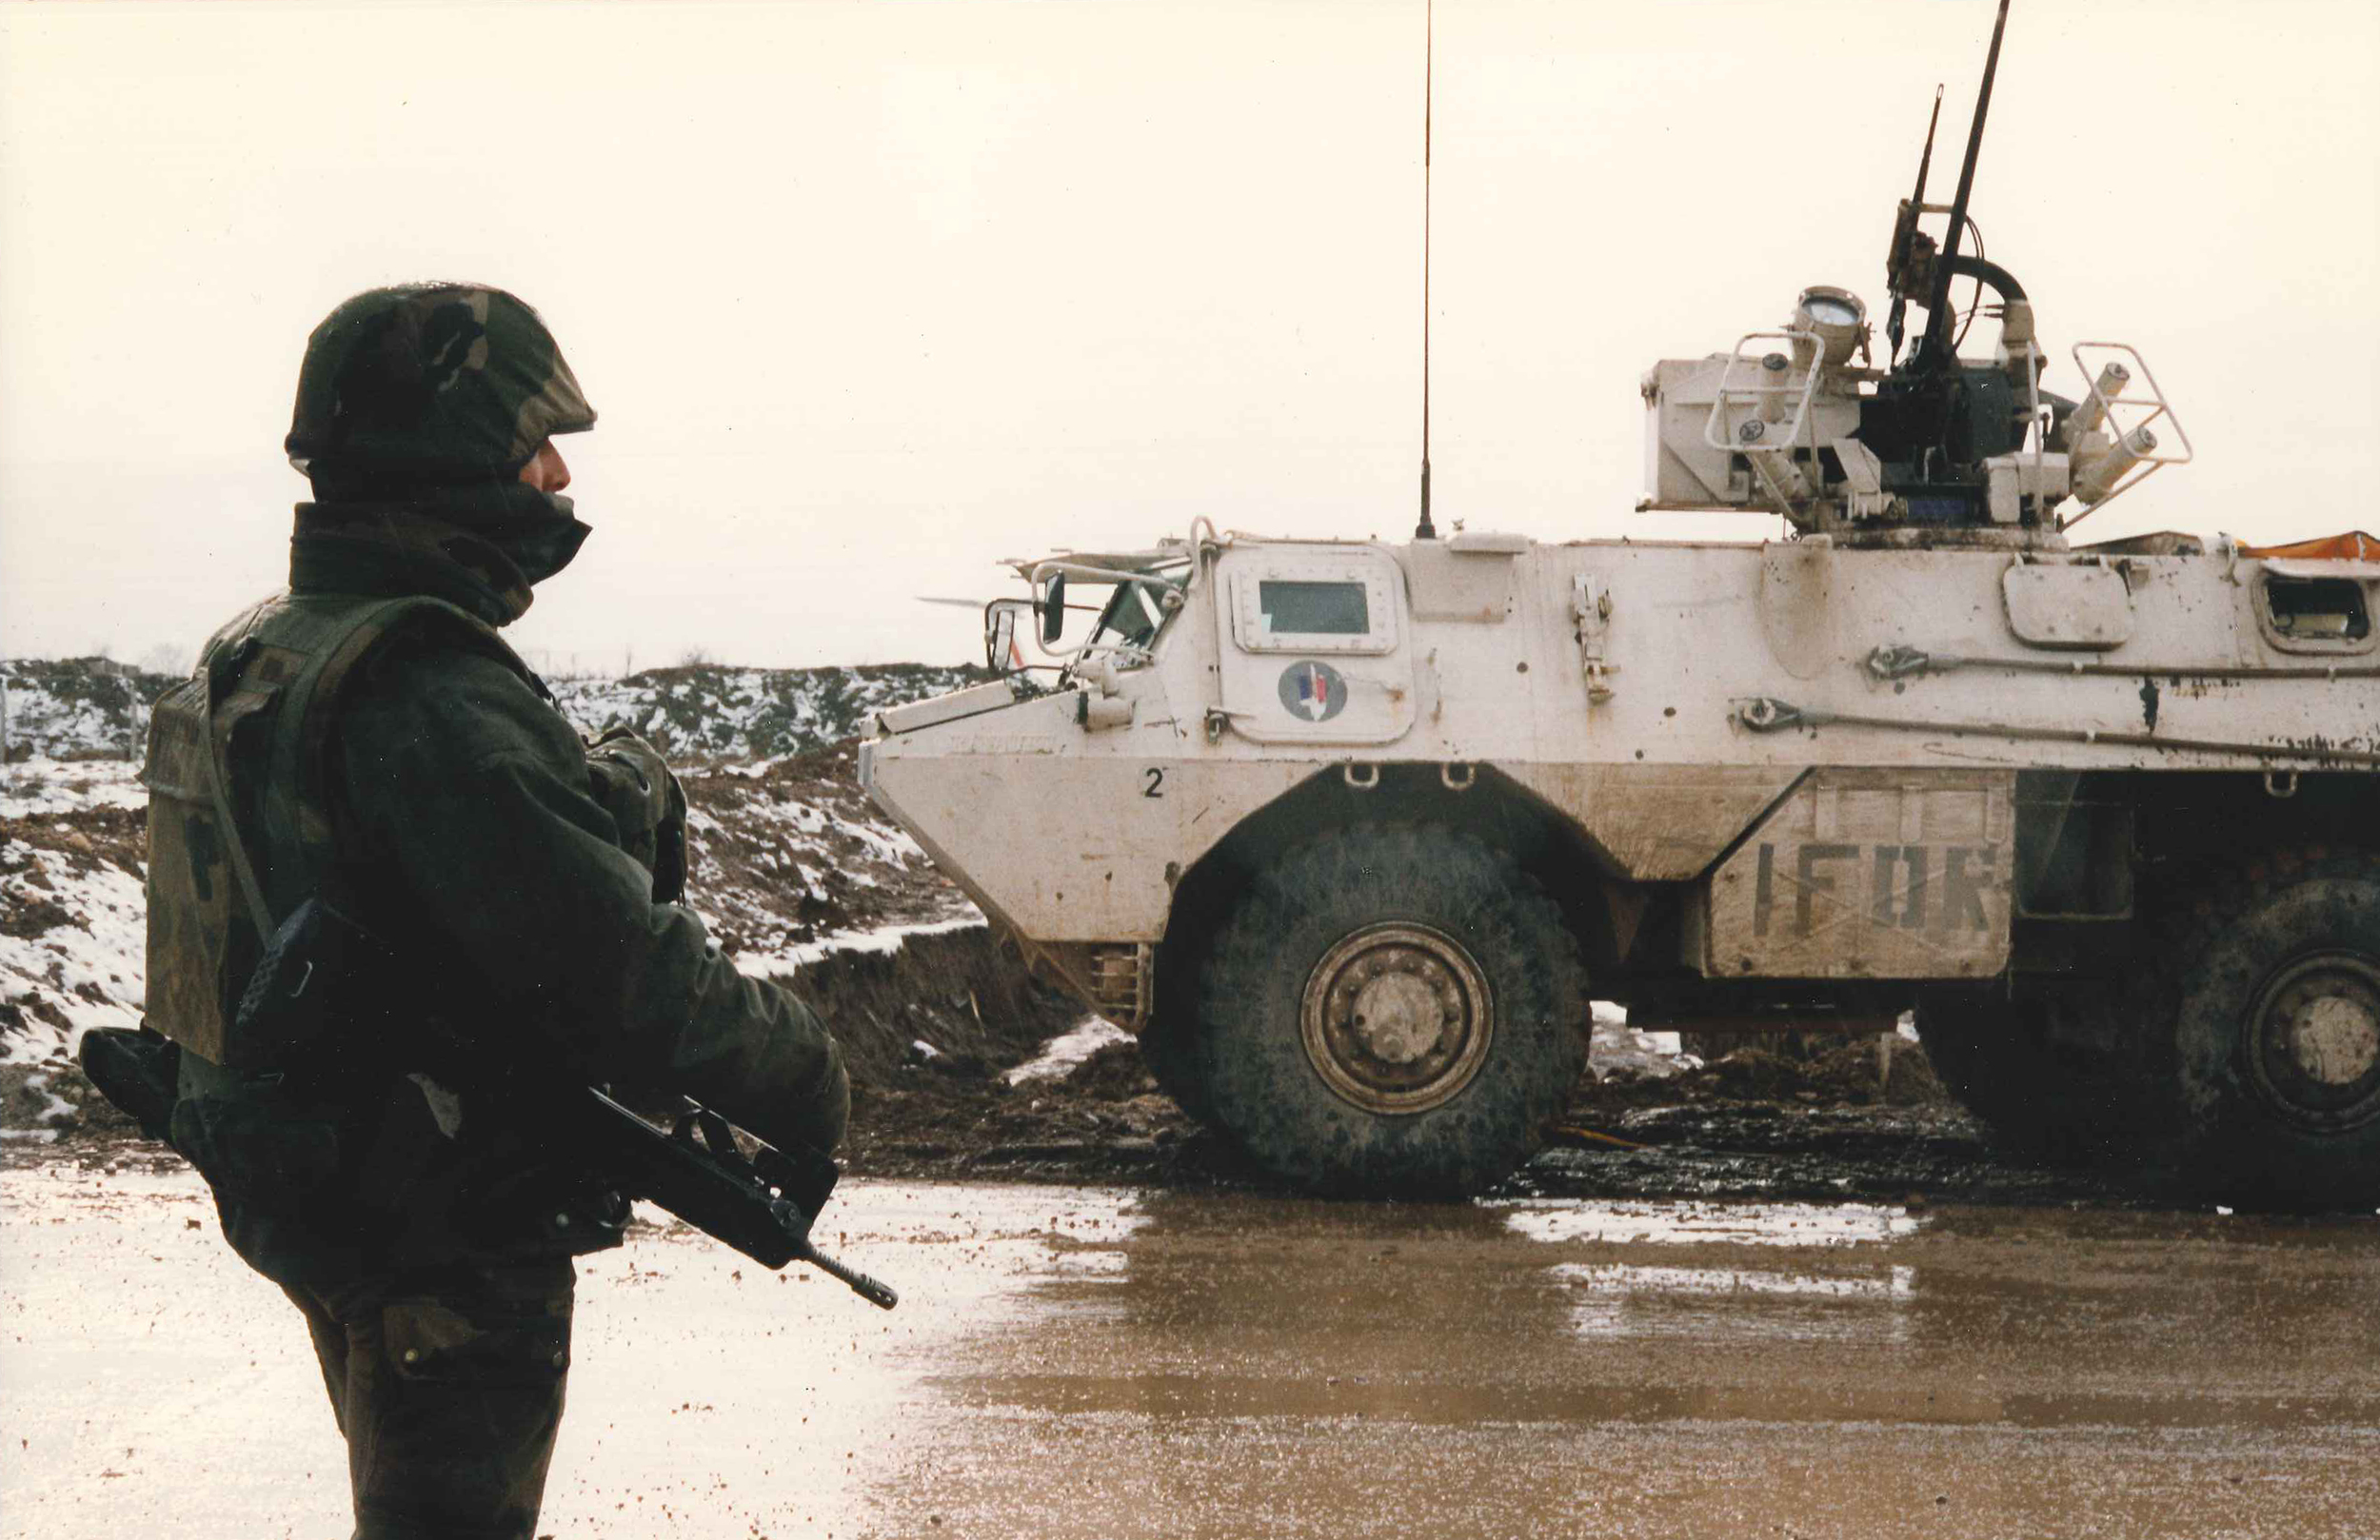 NATO's International Force (IFOR), deployed to Bosnia in December 1995, was the organization's first multinational crisis response team. IFOR conducted military peacekeeping operations for a year.